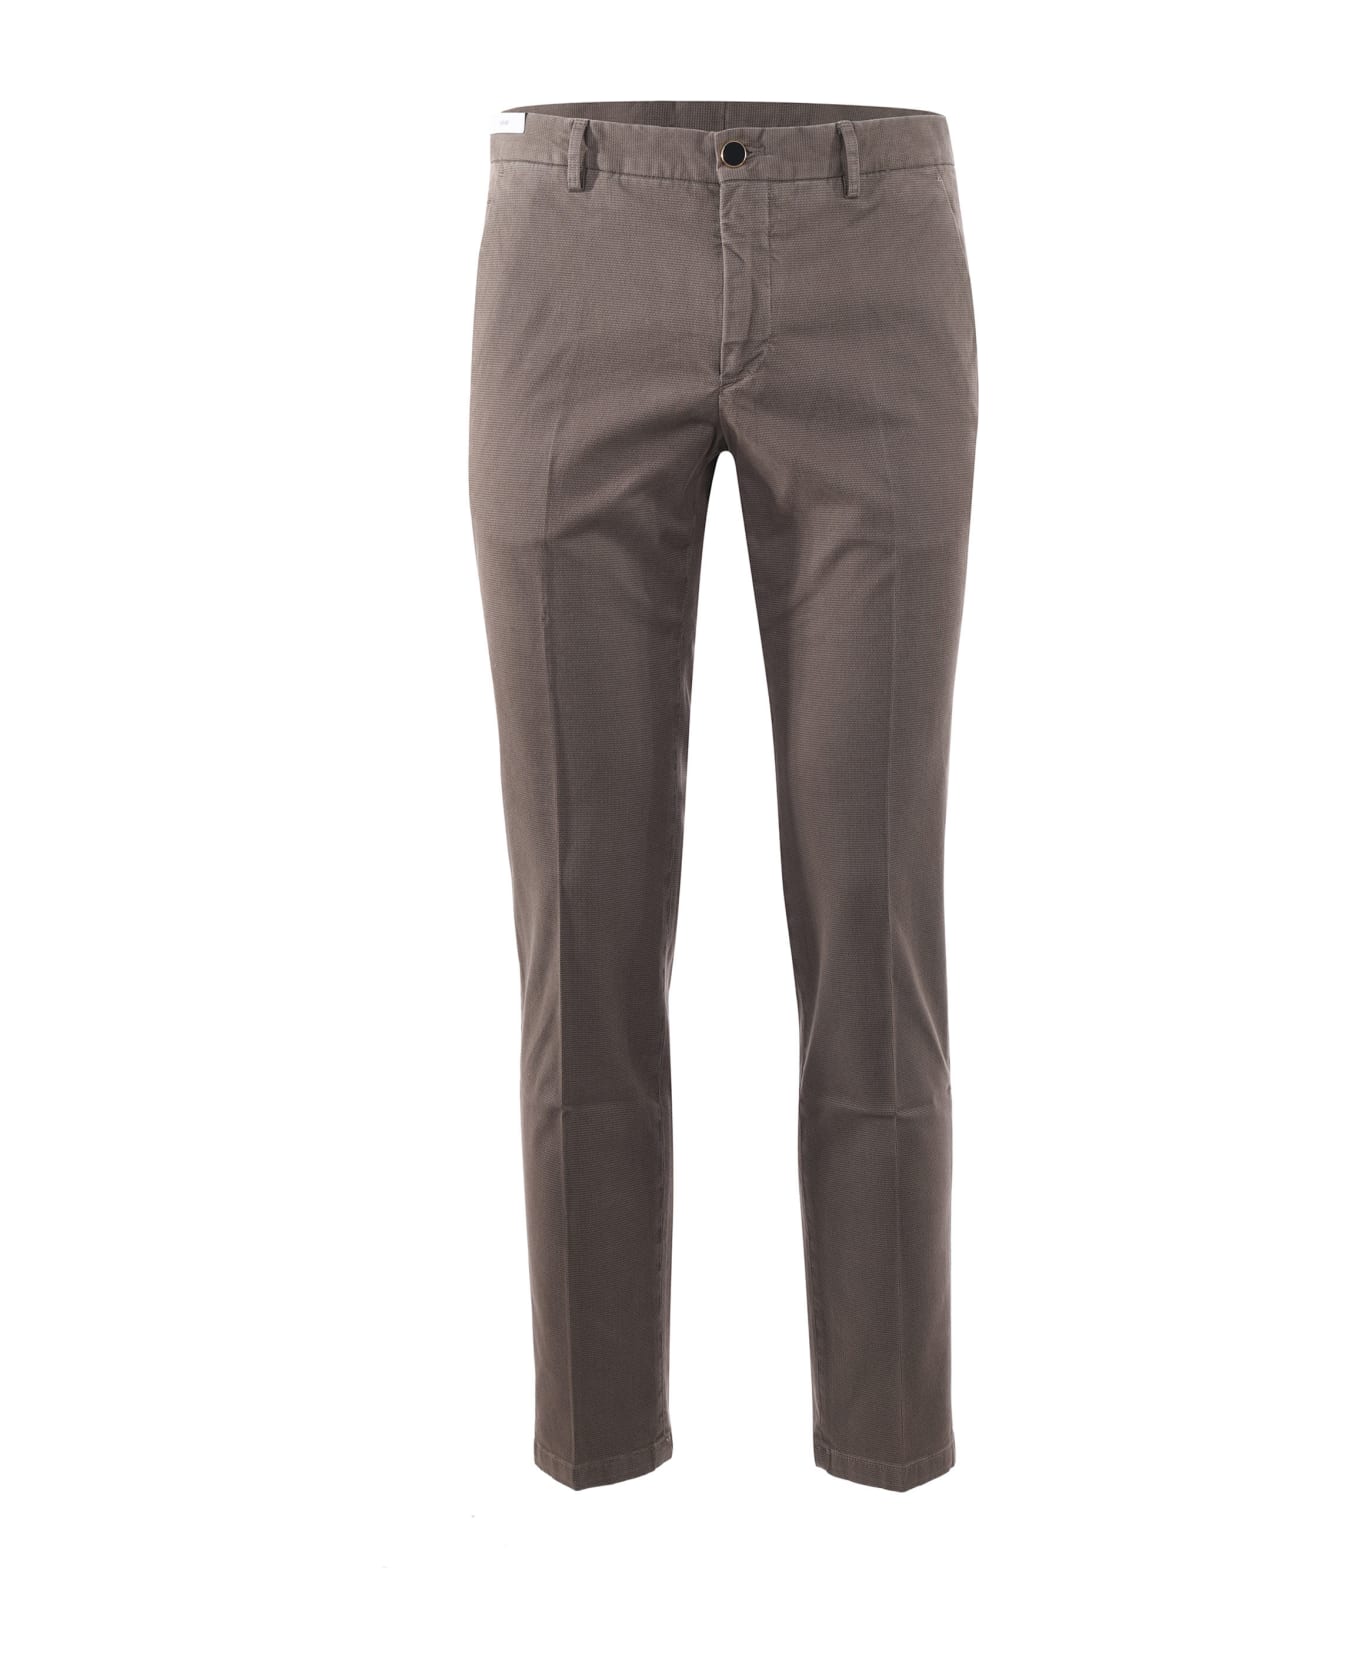 PT Torino Pt01 Trousers In Micro Patterned Stretch Cotton - Tortora